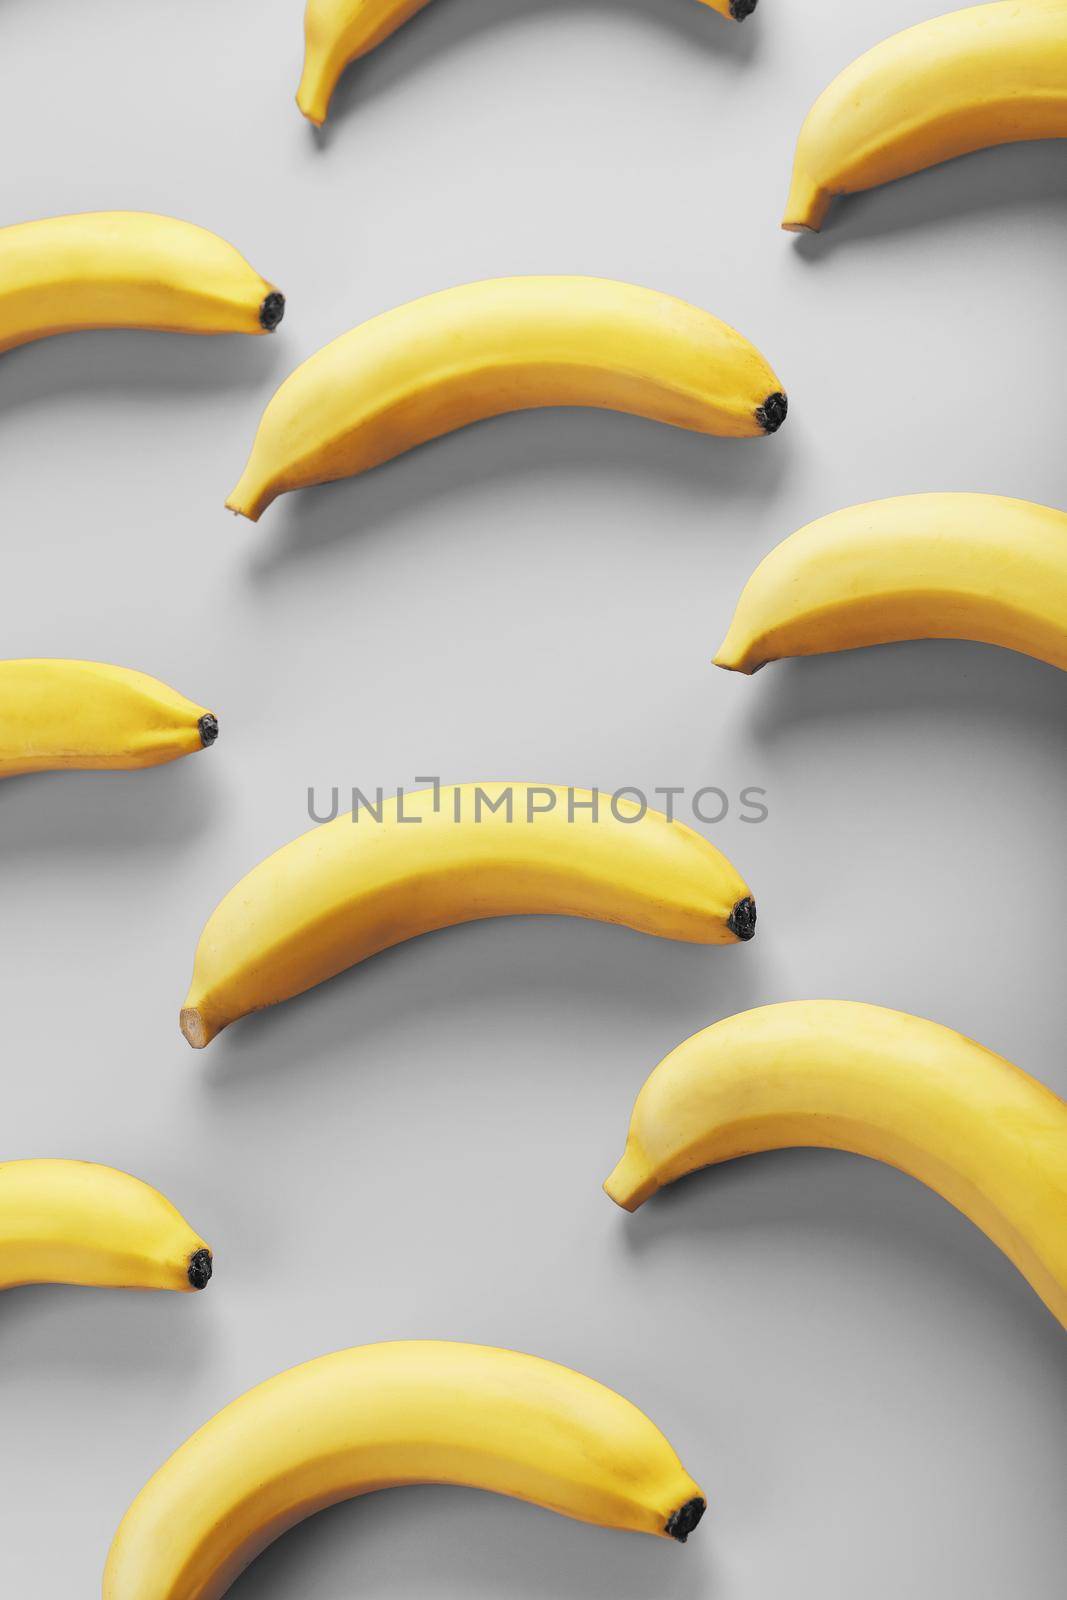 Bright pattern of yellow bananas on a gray background fashionable colors of 2021 by AlexGrec